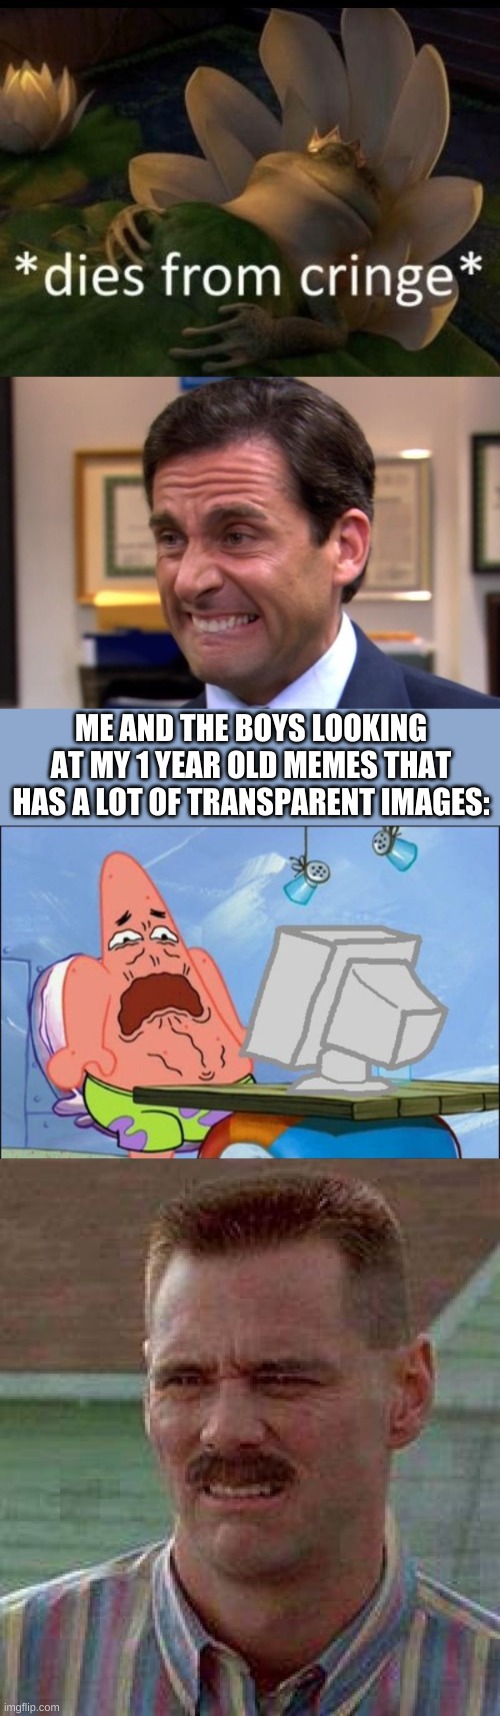 ME AND THE BOYS LOOKING AT MY 1 YEAR OLD MEMES THAT HAS A LOT OF TRANSPARENT IMAGES: | image tagged in dies from cringe,cringe,patrick star cringing,cringe carrey | made w/ Imgflip meme maker